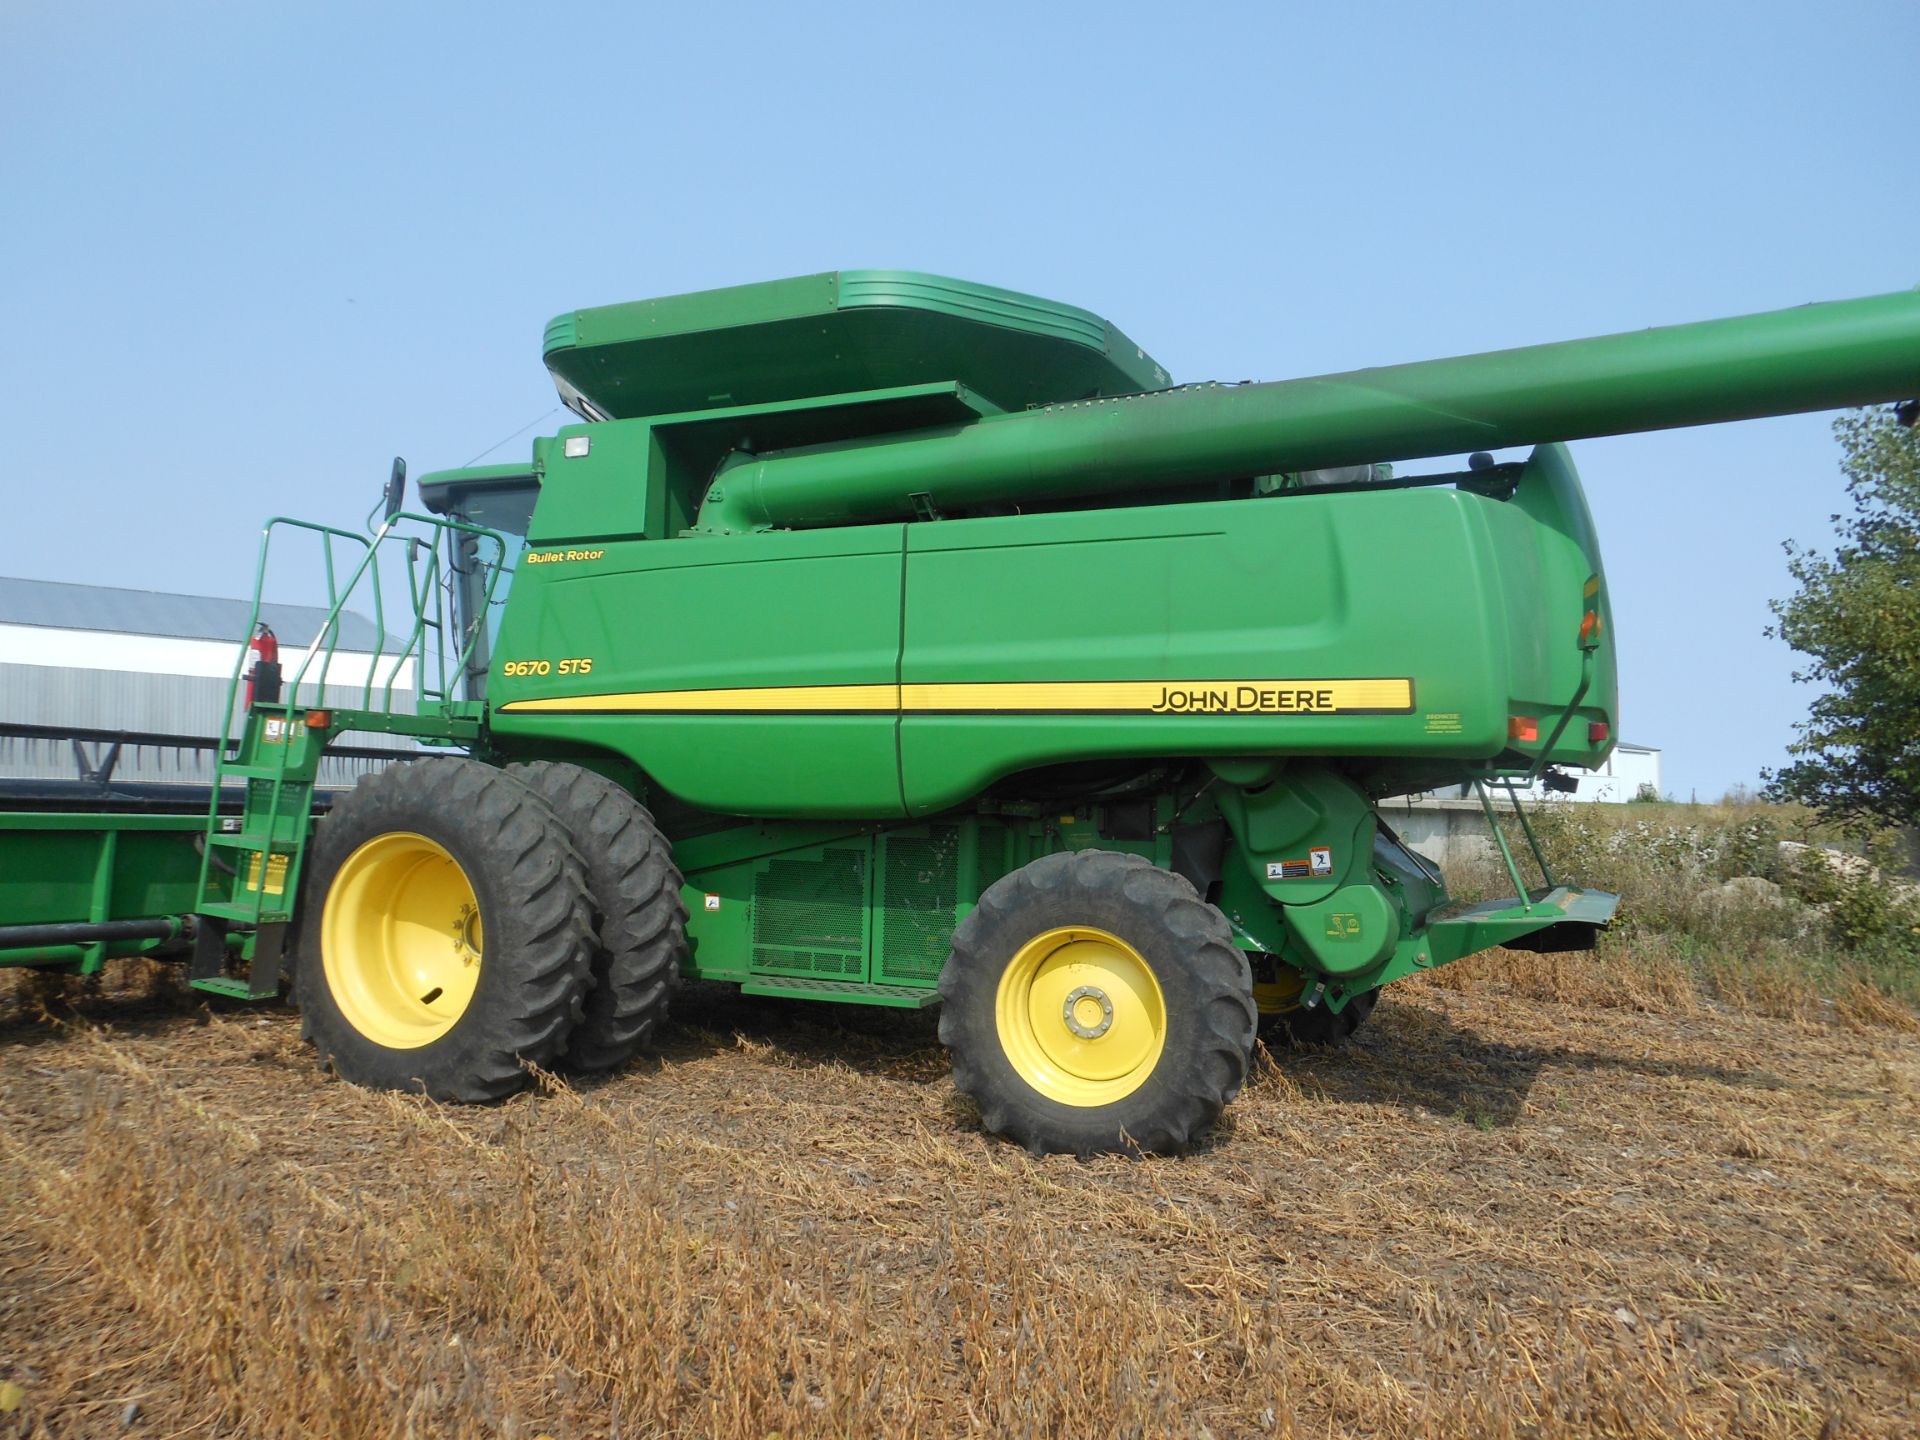 2009 JD 9670 STS bullet rotor - Image 4 of 8